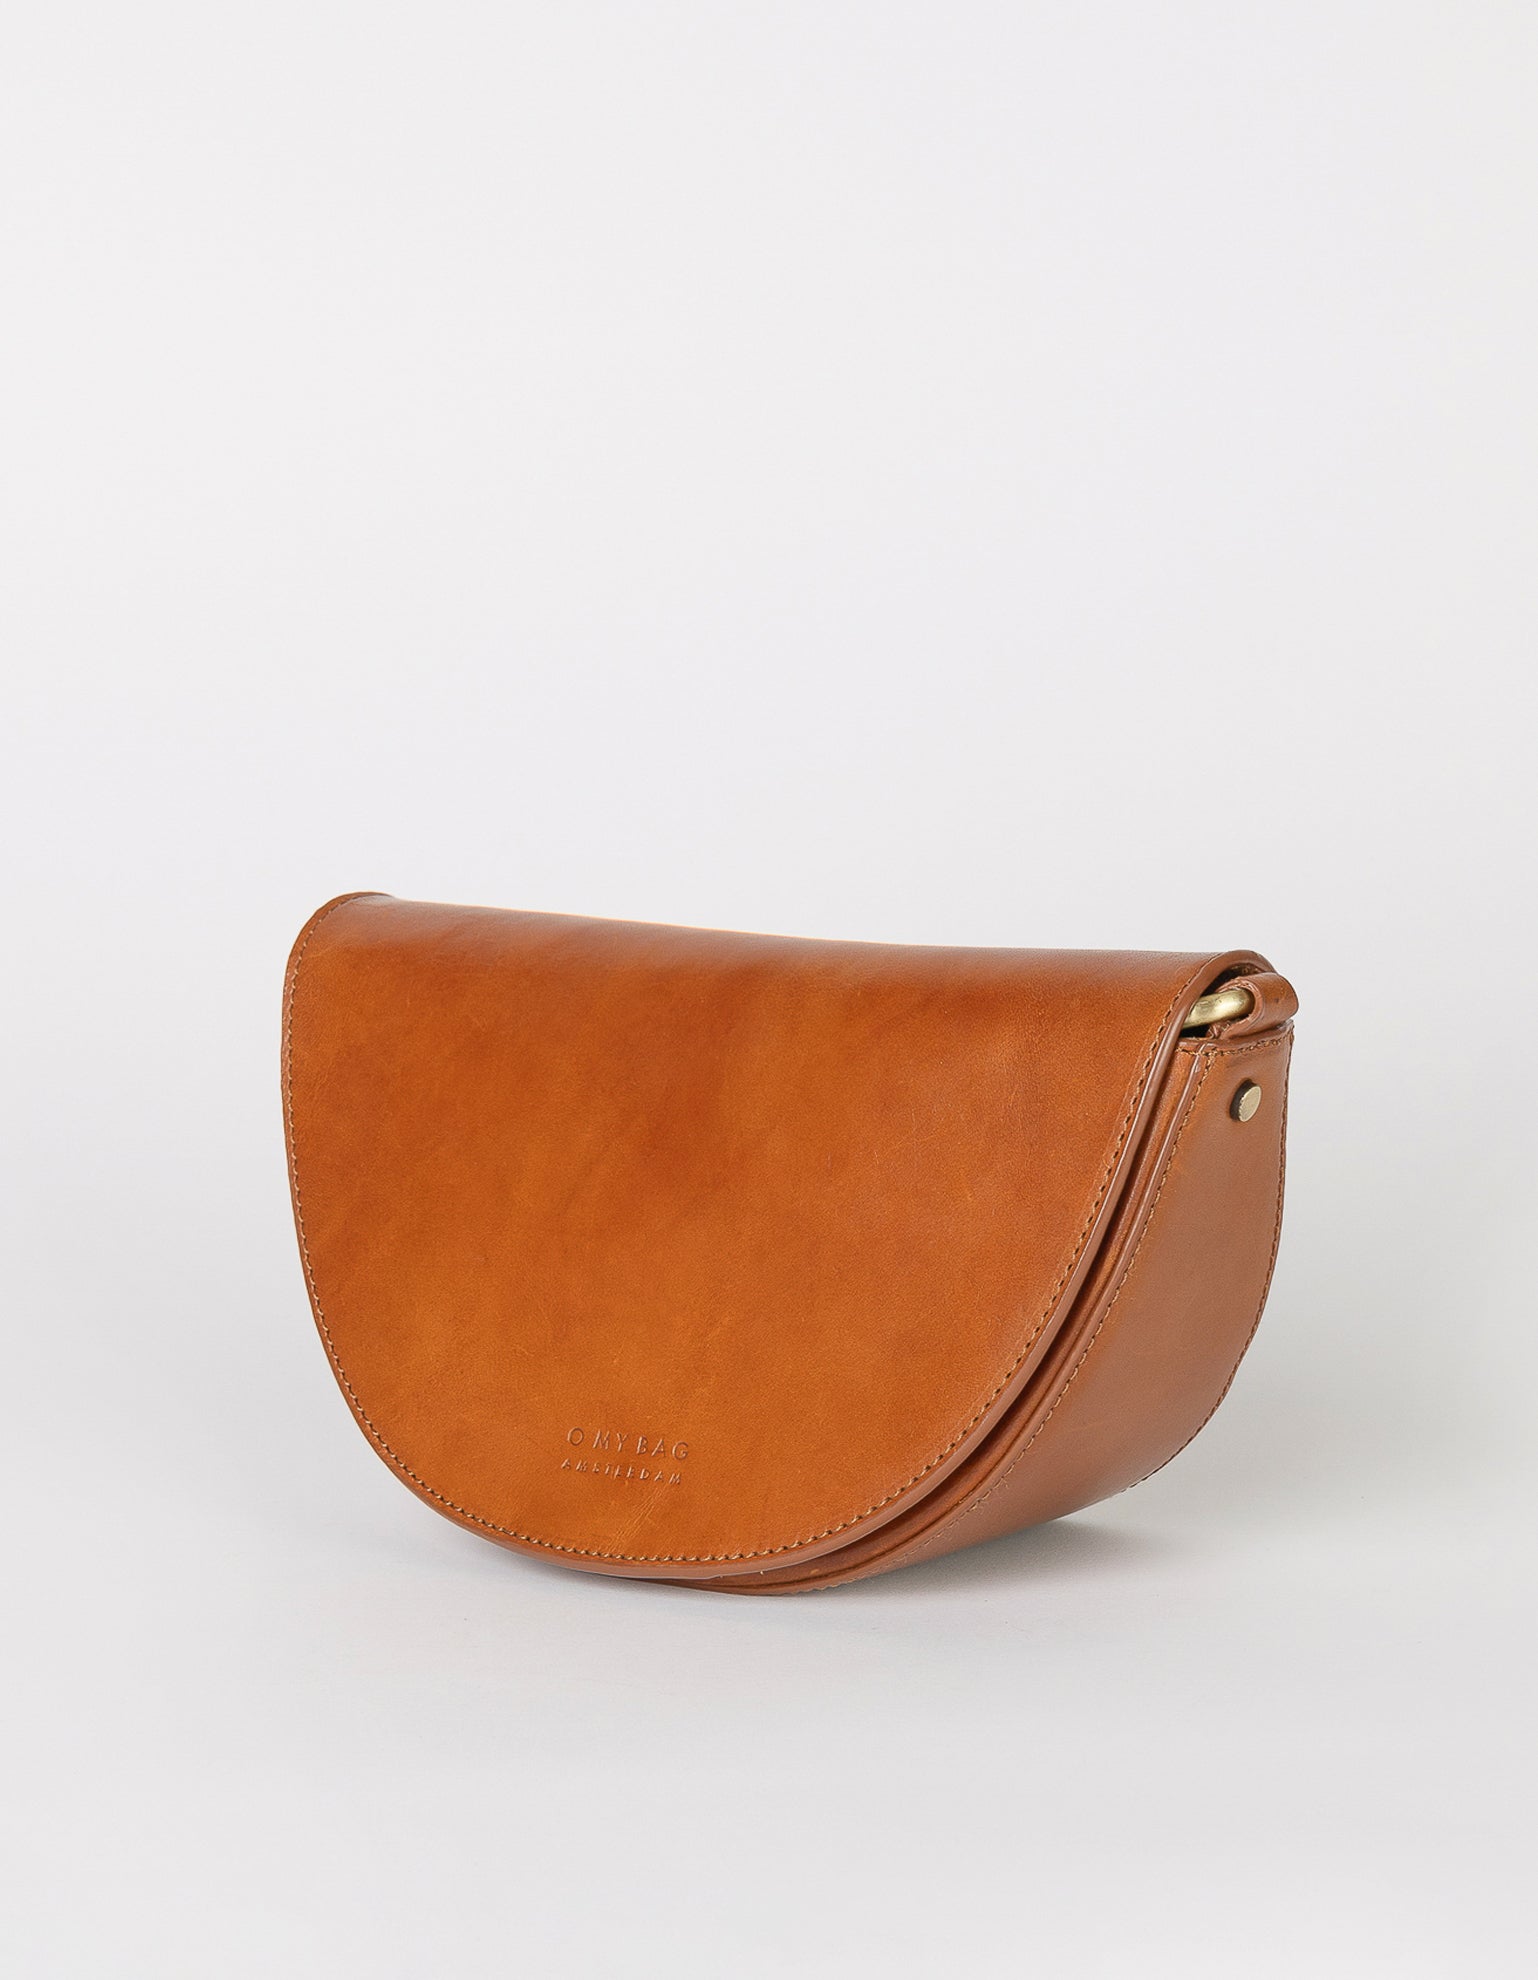 Laura Bag Cognac Classic Leather. Round moon shape crossbody bag . Side product image.